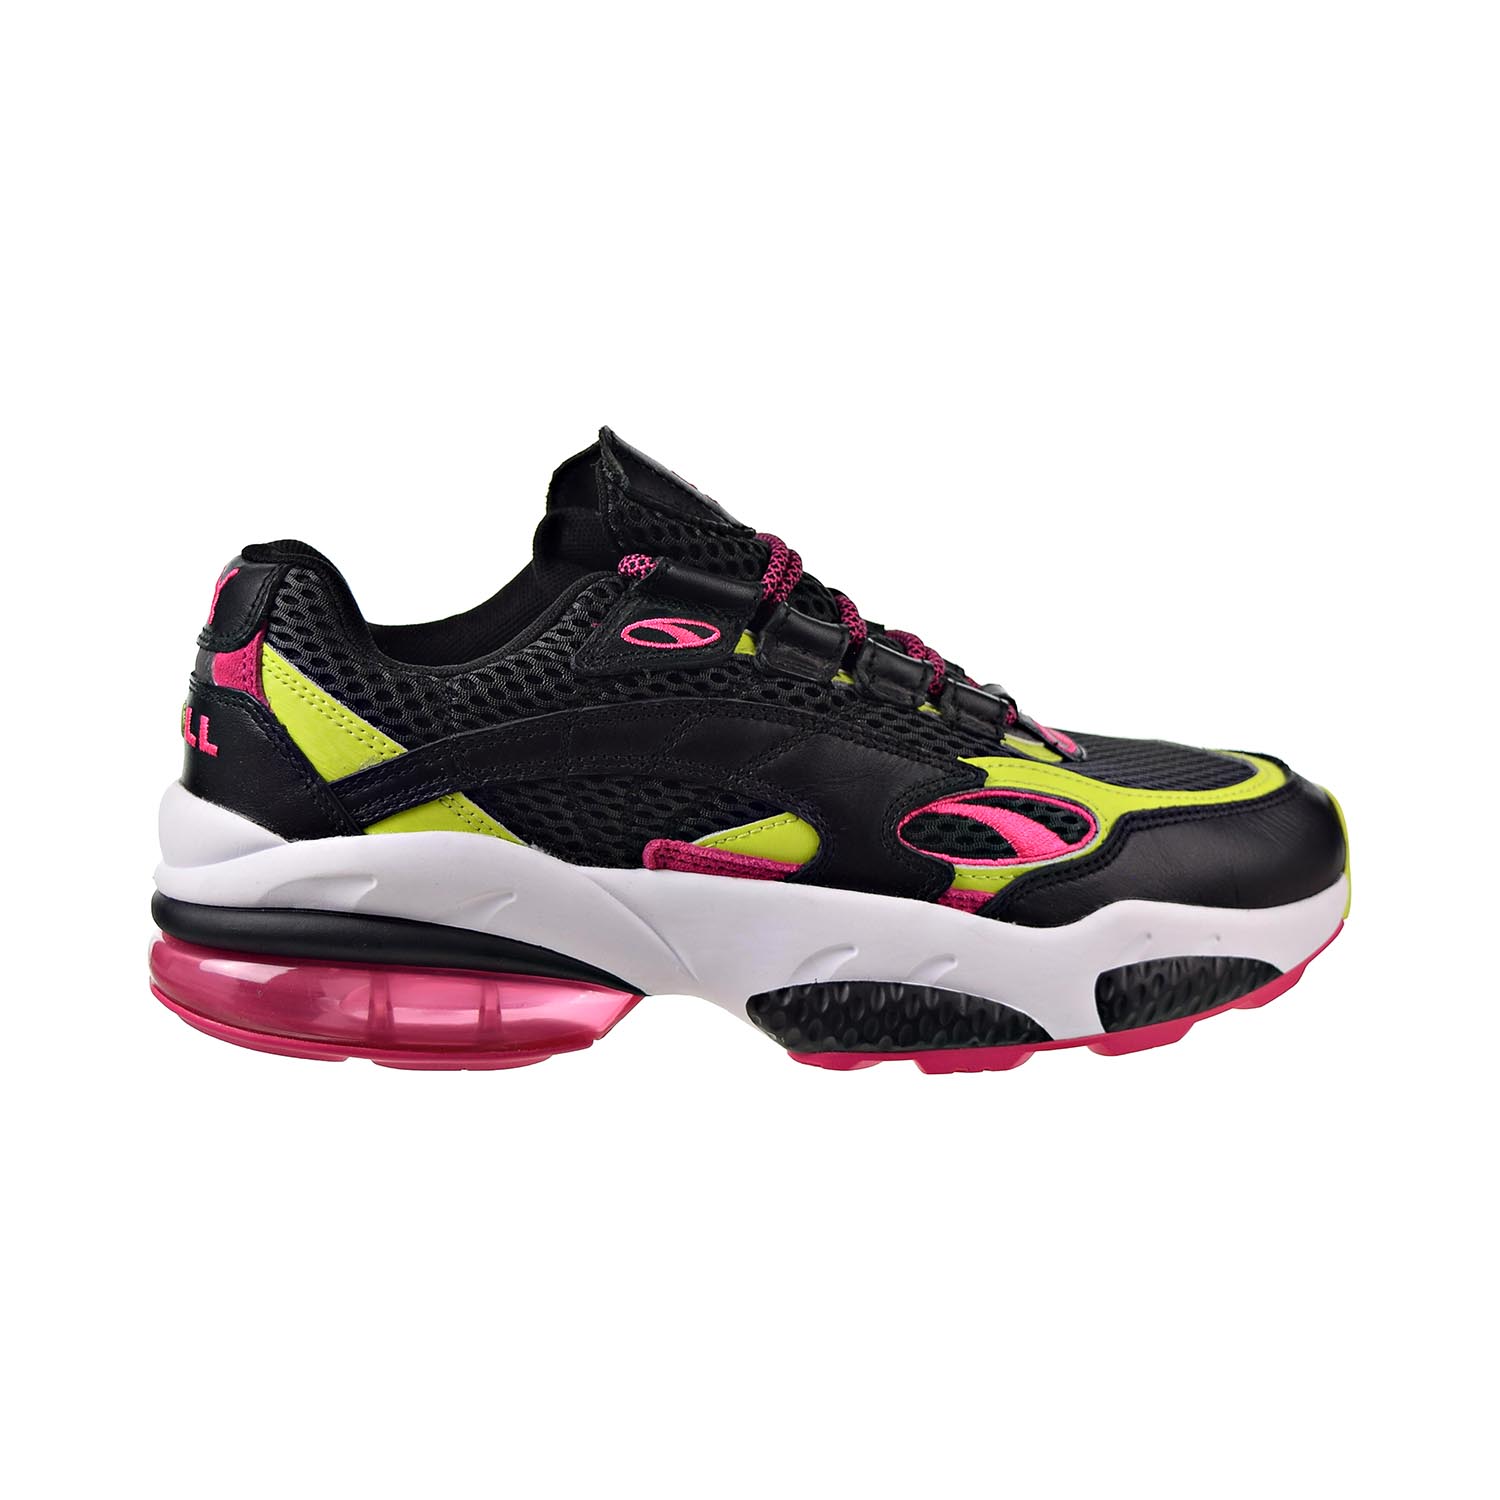 Puma Cell Venom 370417-01 Men Black/Pink/Lime Punch Athletic Running Shoes C1385 (10) - image 1 of 6